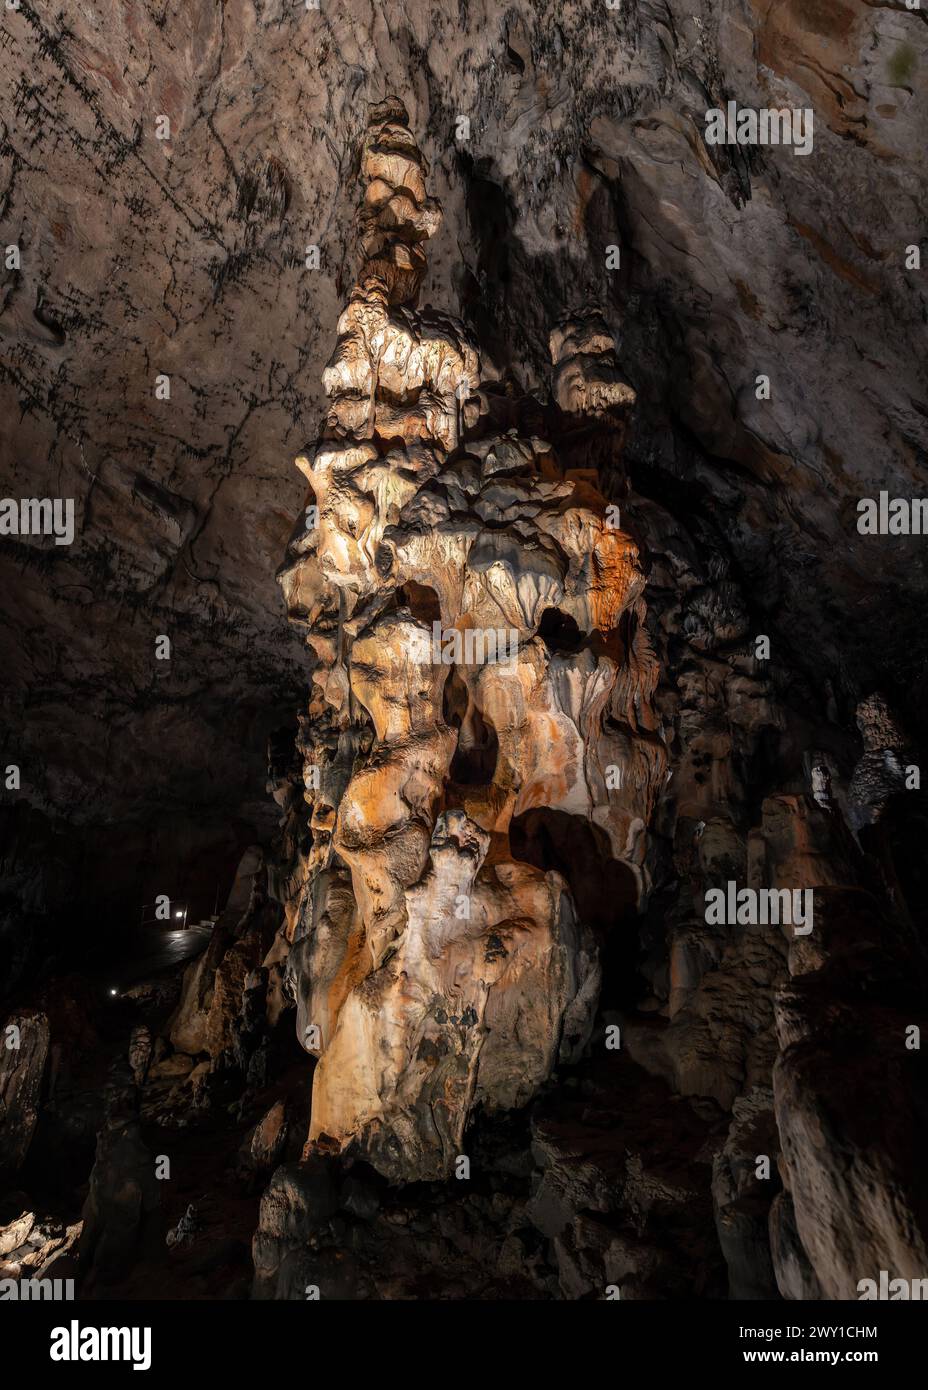 03.30.24. Aggtelek, Hungary. The baradla cave is an  ancient amazing dripstone cave in Aggtelek national park, East Hungary near by Slovakian border. Stock Photo